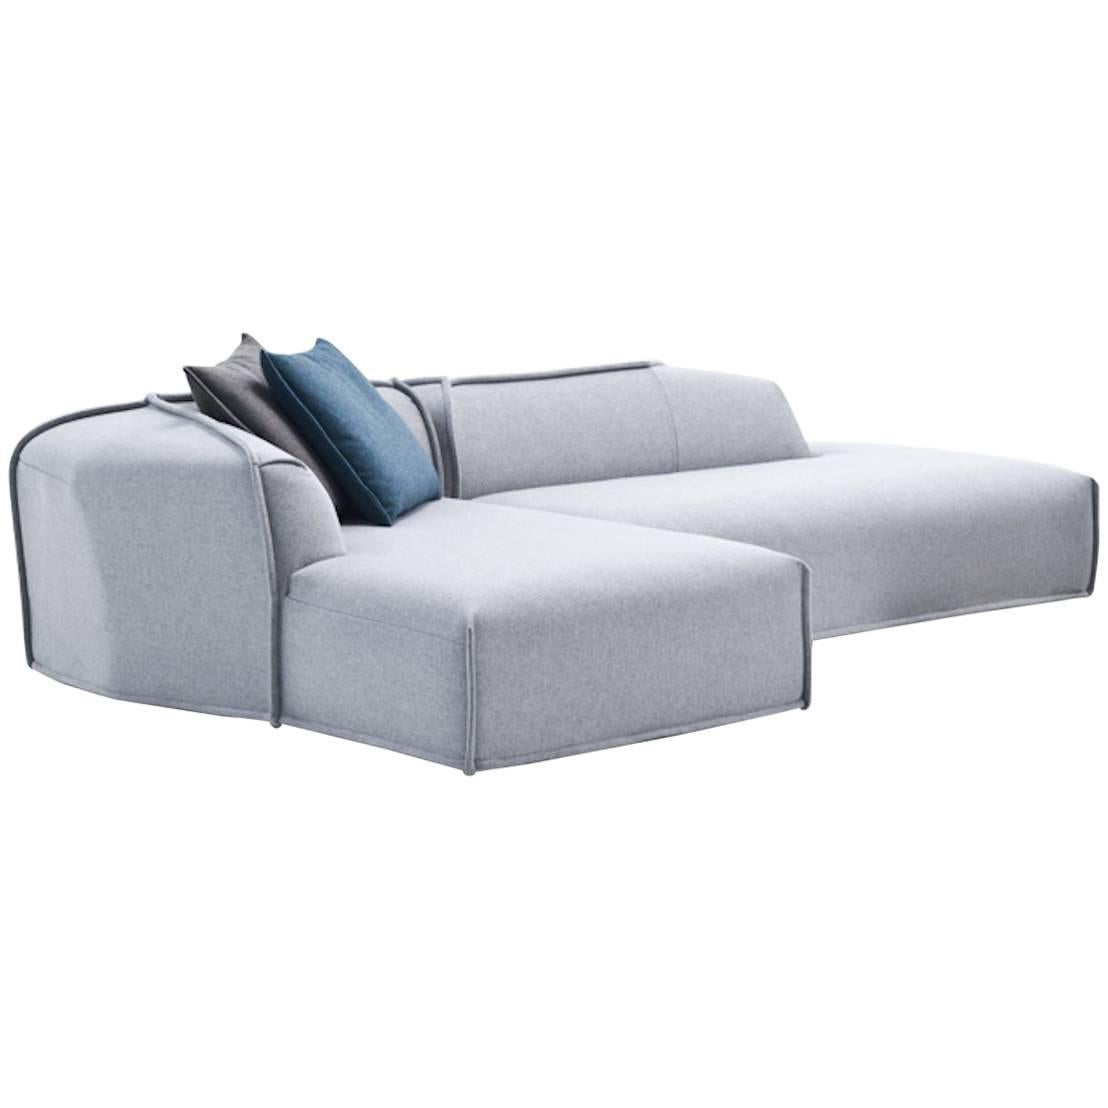 M.A.S.S.A.S Modular Sofa by Patricia Urquiola for Moroso in Fabric For Sale